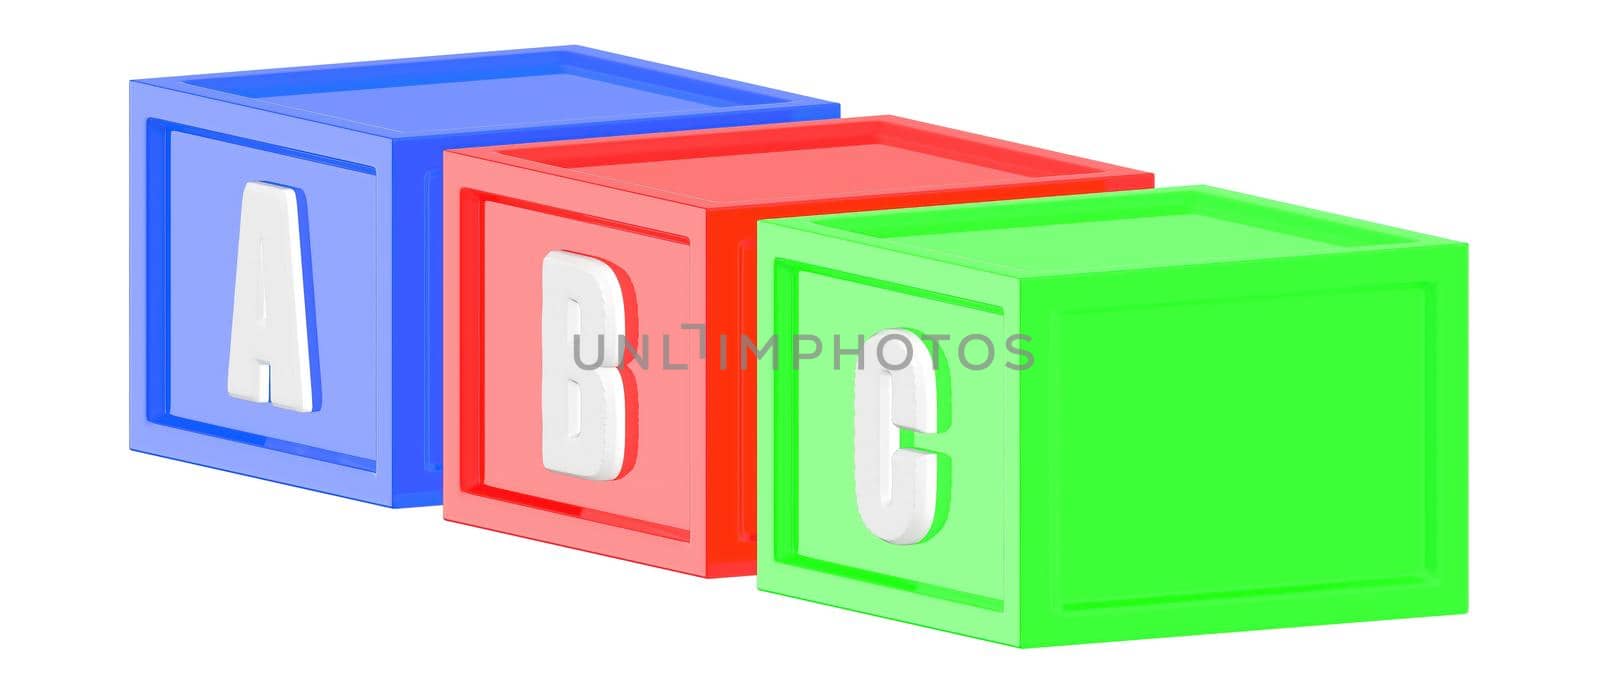 3d blue red green color cubes with a b c in it respectively- 3d rendering